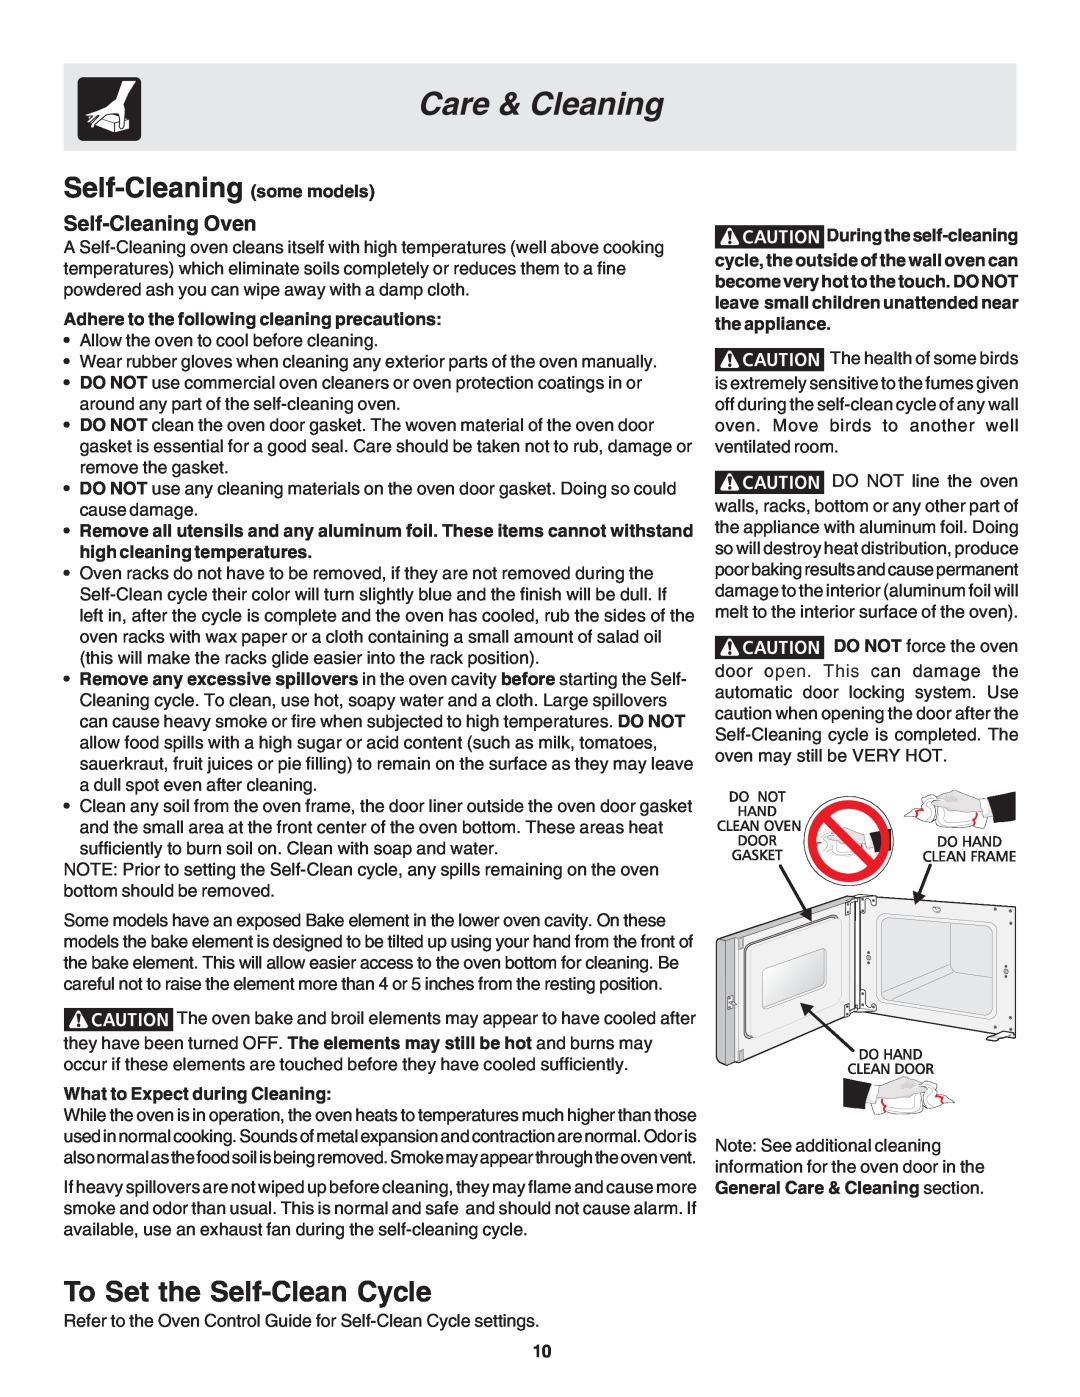 Frigidaire 318205121 warranty Self-Cleaning some models, To Set the Self-Clean Cycle, Self-Cleaning Oven, Care & Cleaning 